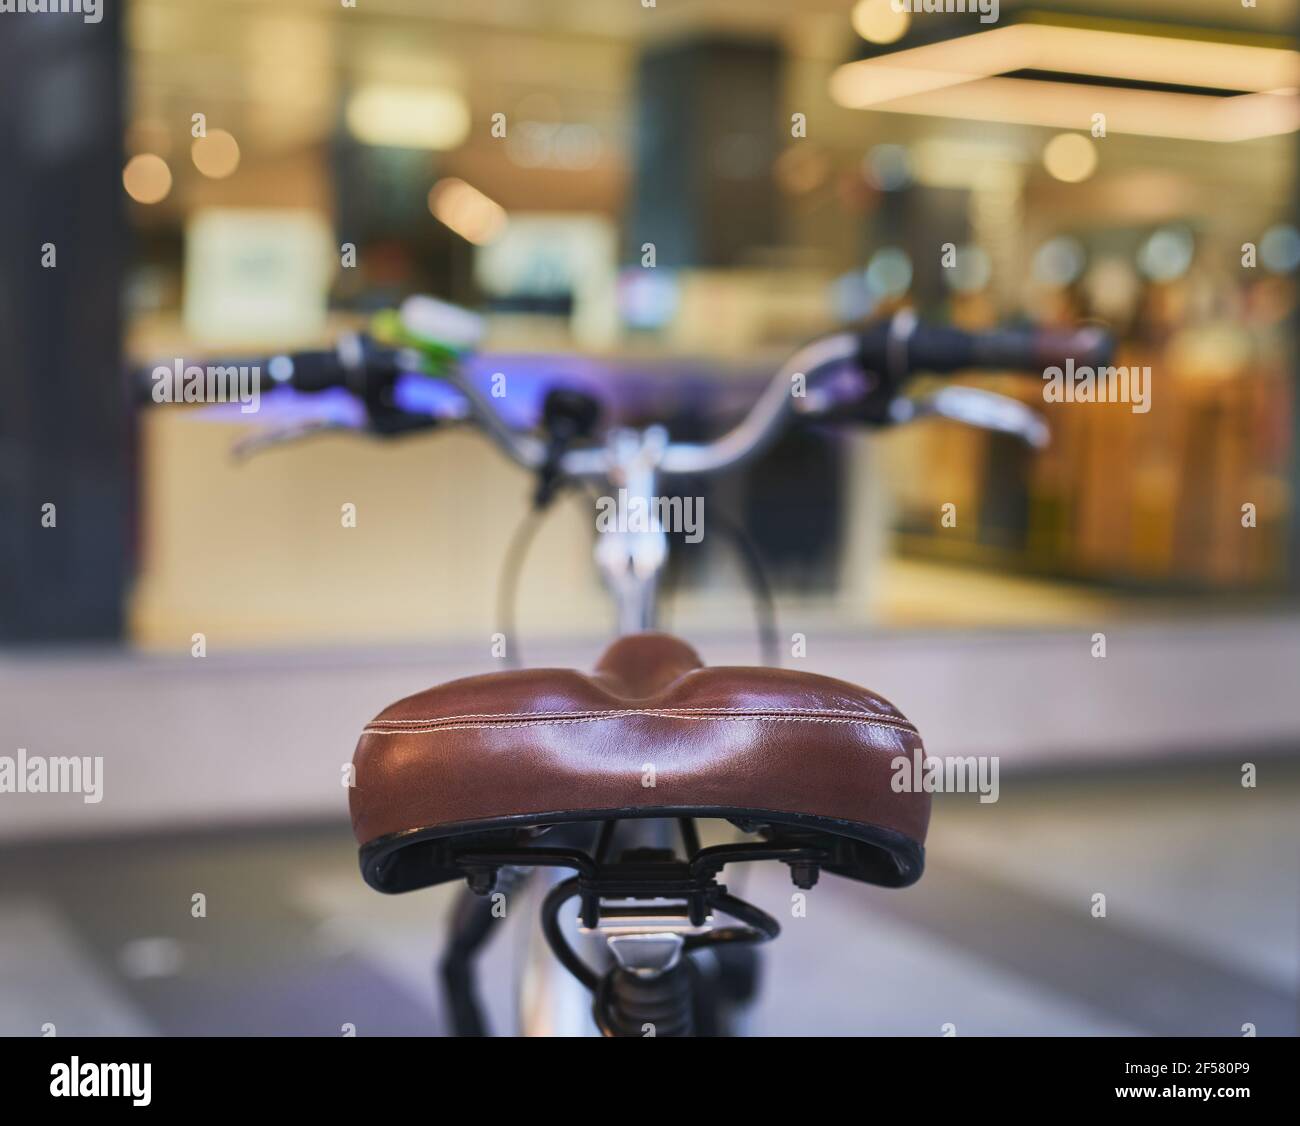 detail of a rear view of a bicycle seat with handlebars out of focus Stock Photo